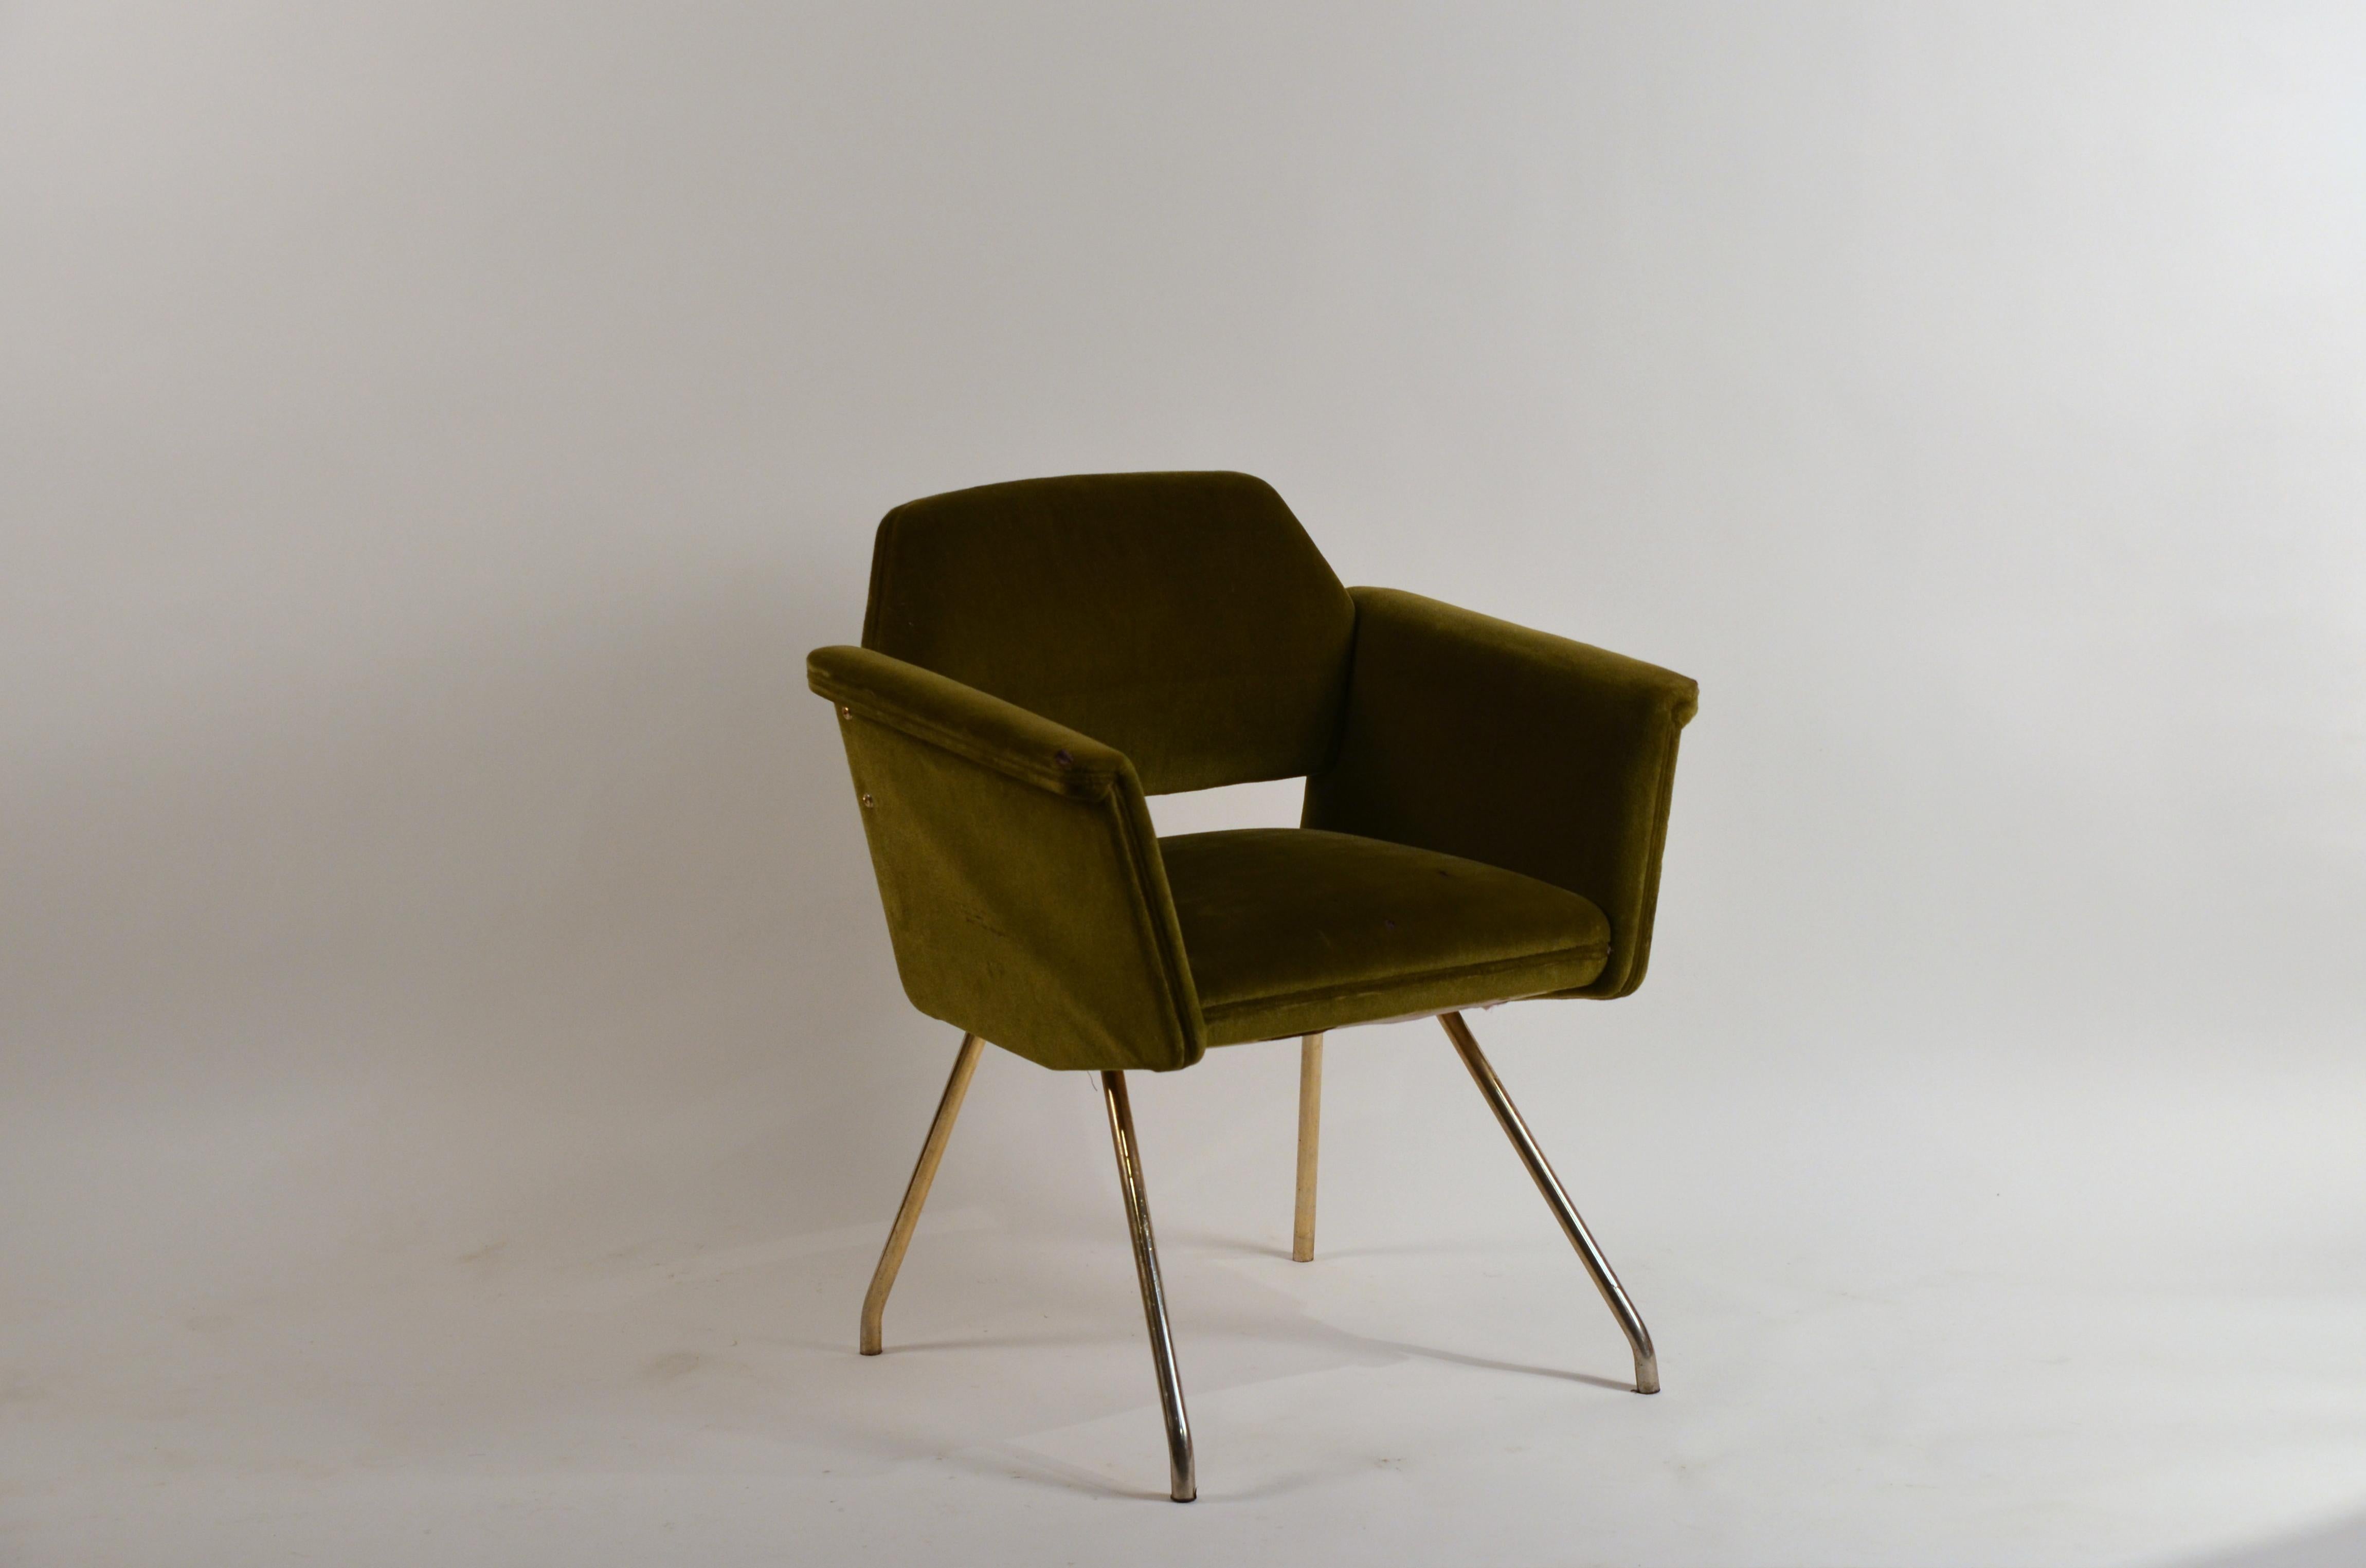 Rare French 1950s 'Prisme' armchair by Joseph-André Motte.

Original Steiner tag number 41079 under the seat.

25 in. arm height.

Joseph-André Motte was a French furniture and interior designer, considered one of the most influential Post-War